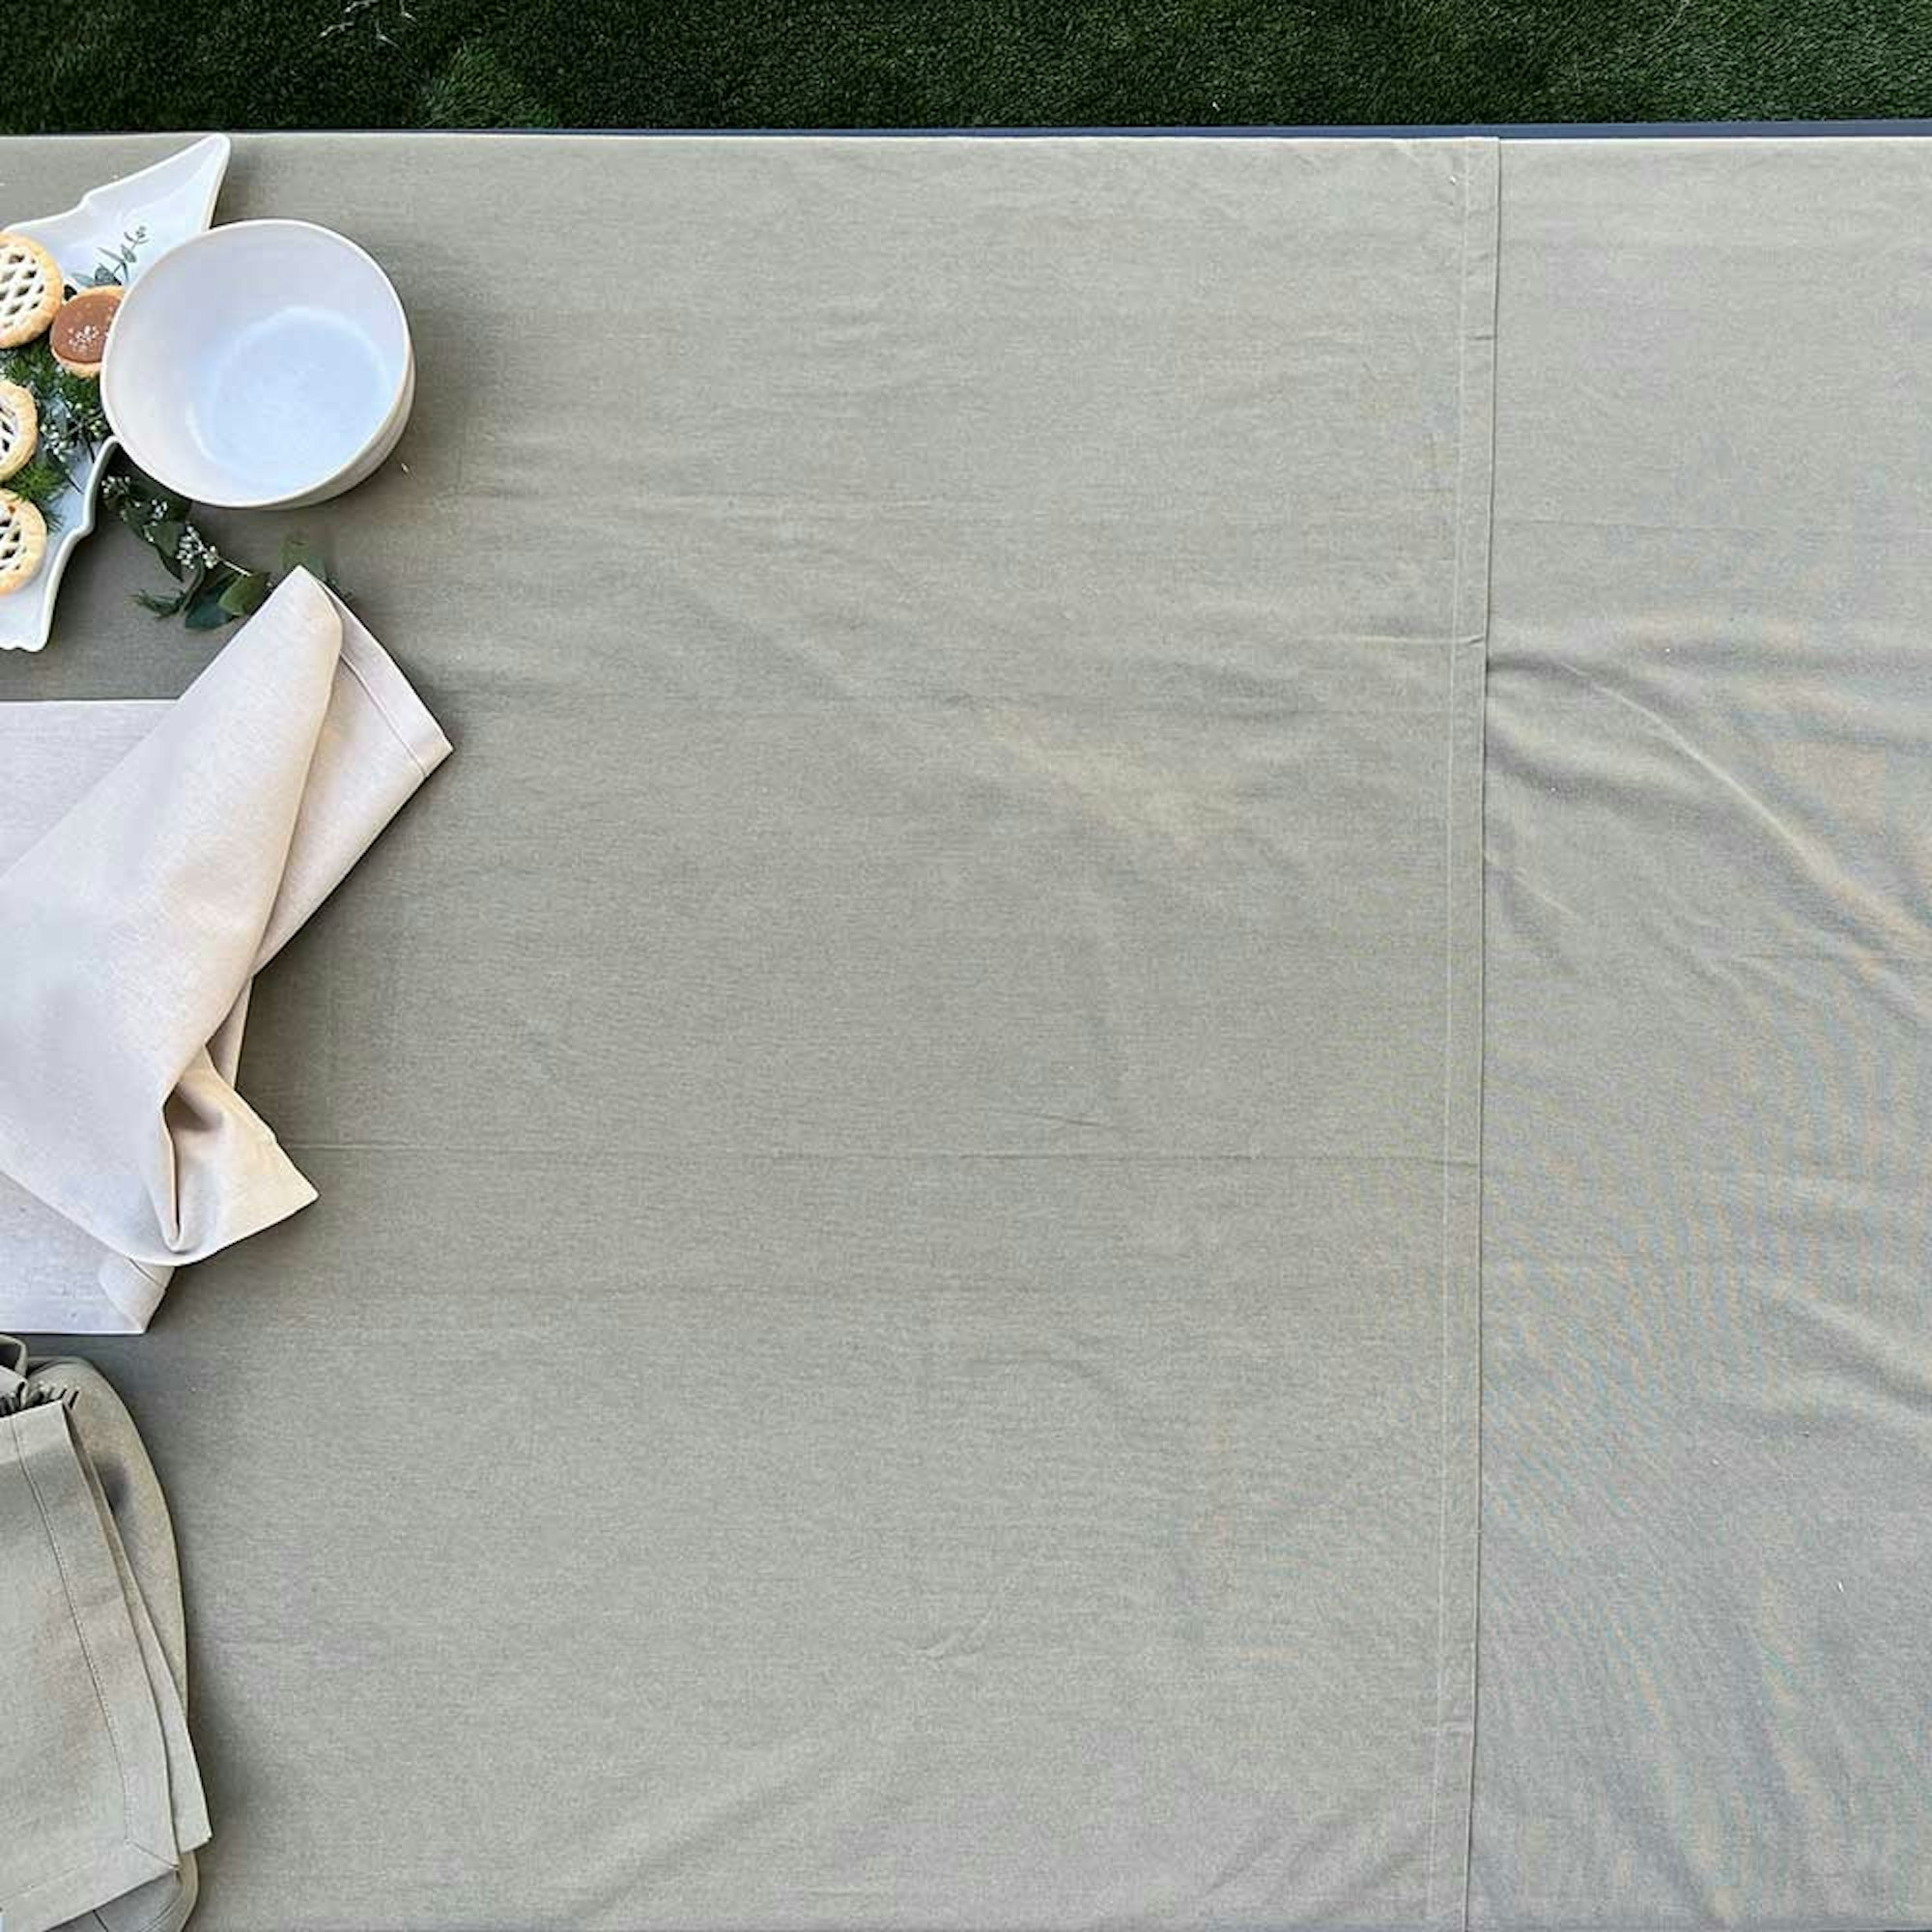 How to style a dining table for a dinner party. Step 1 preparing the table. Empty table with green table cloth.